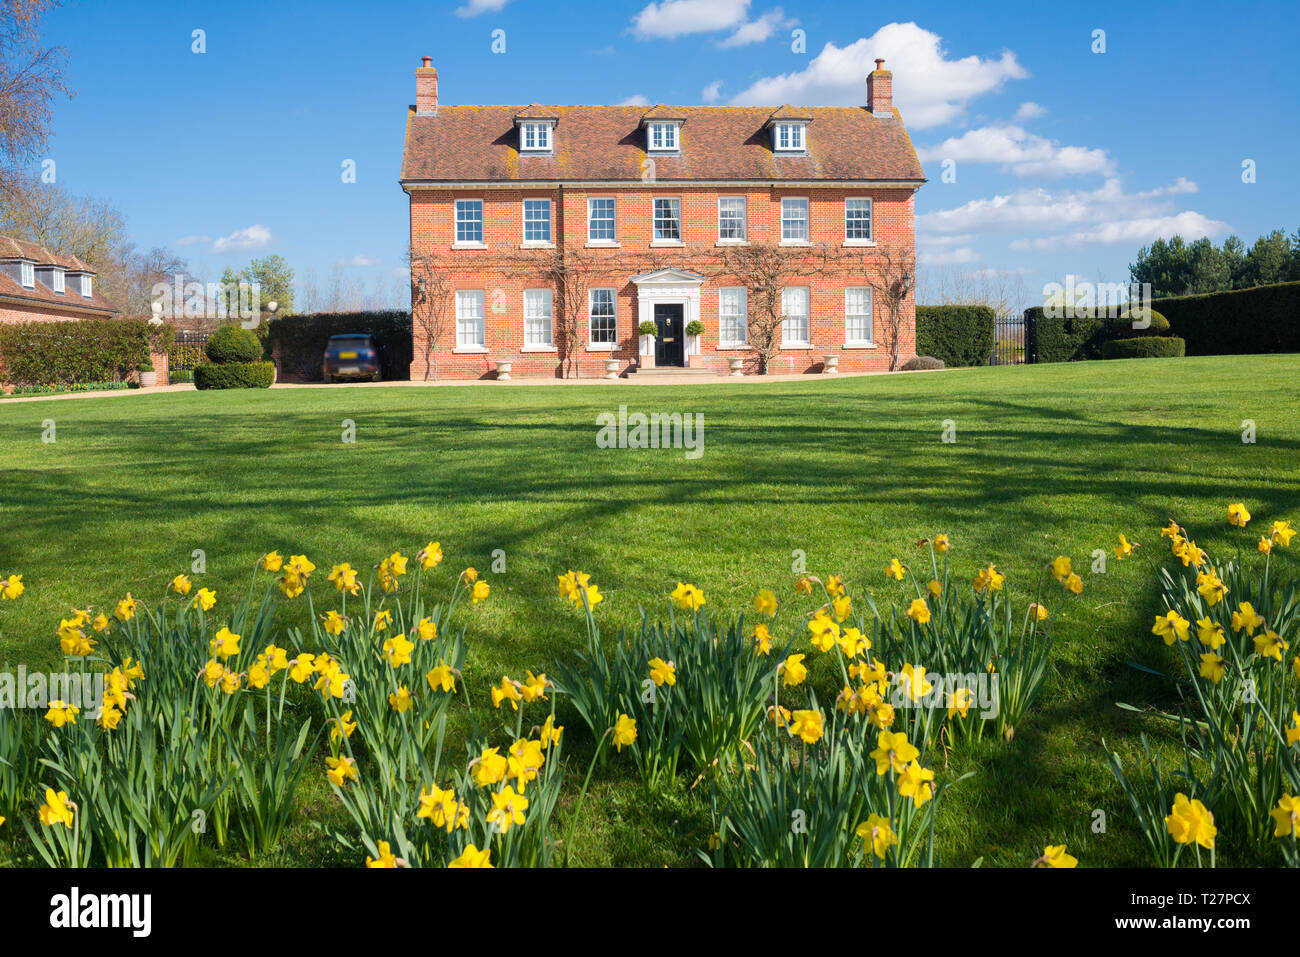 Elegant English Country Manor mansion house Grade 2 listed Victorian period property in red brick. Front view with large garden, green lawn and daffod Stock Photo